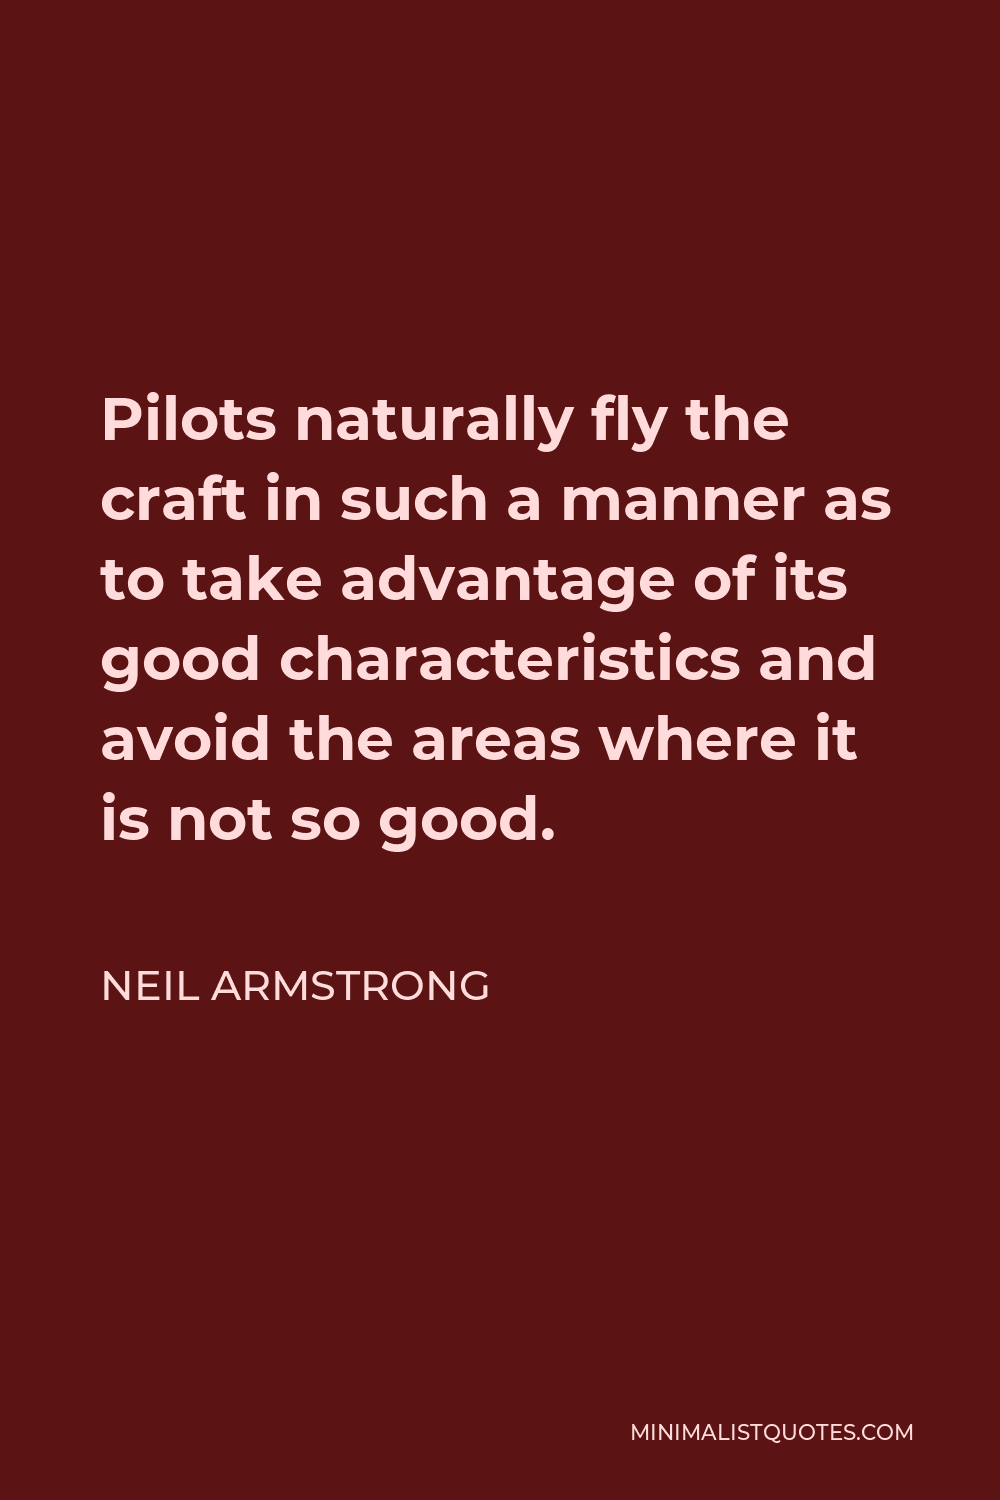 Neil Armstrong Quote - Pilots naturally fly the craft in such a manner as to take advantage of its good characteristics and avoid the areas where it is not so good.